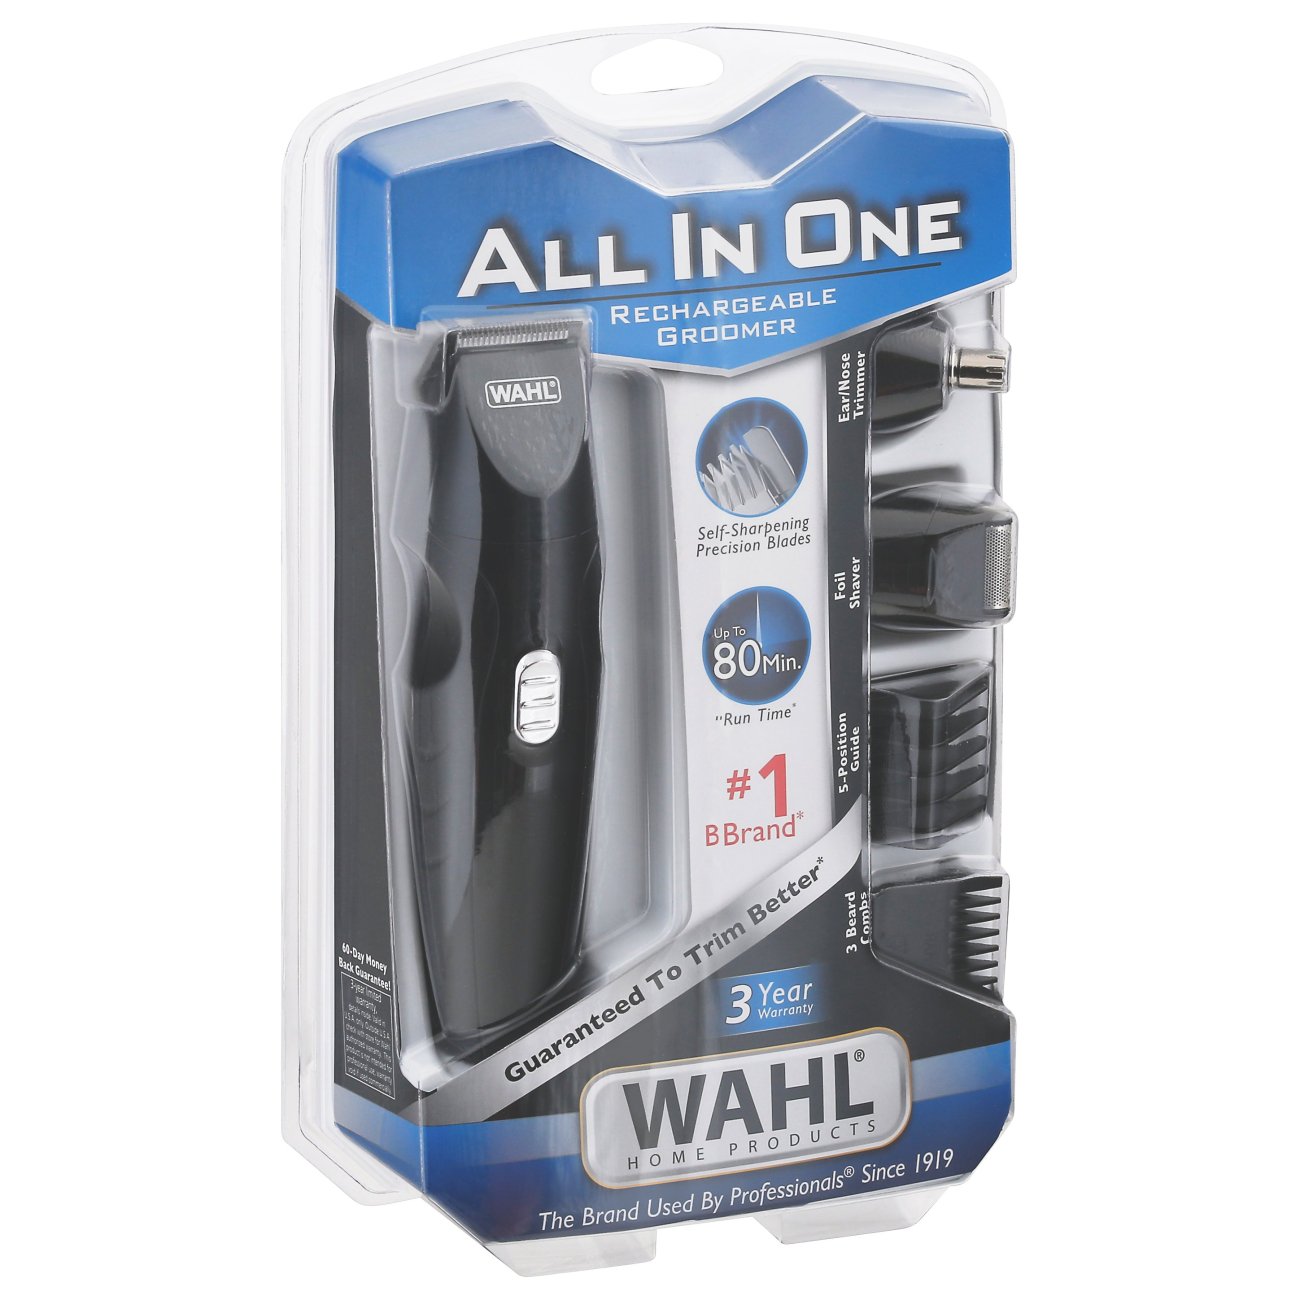 rechargeable grooming kit